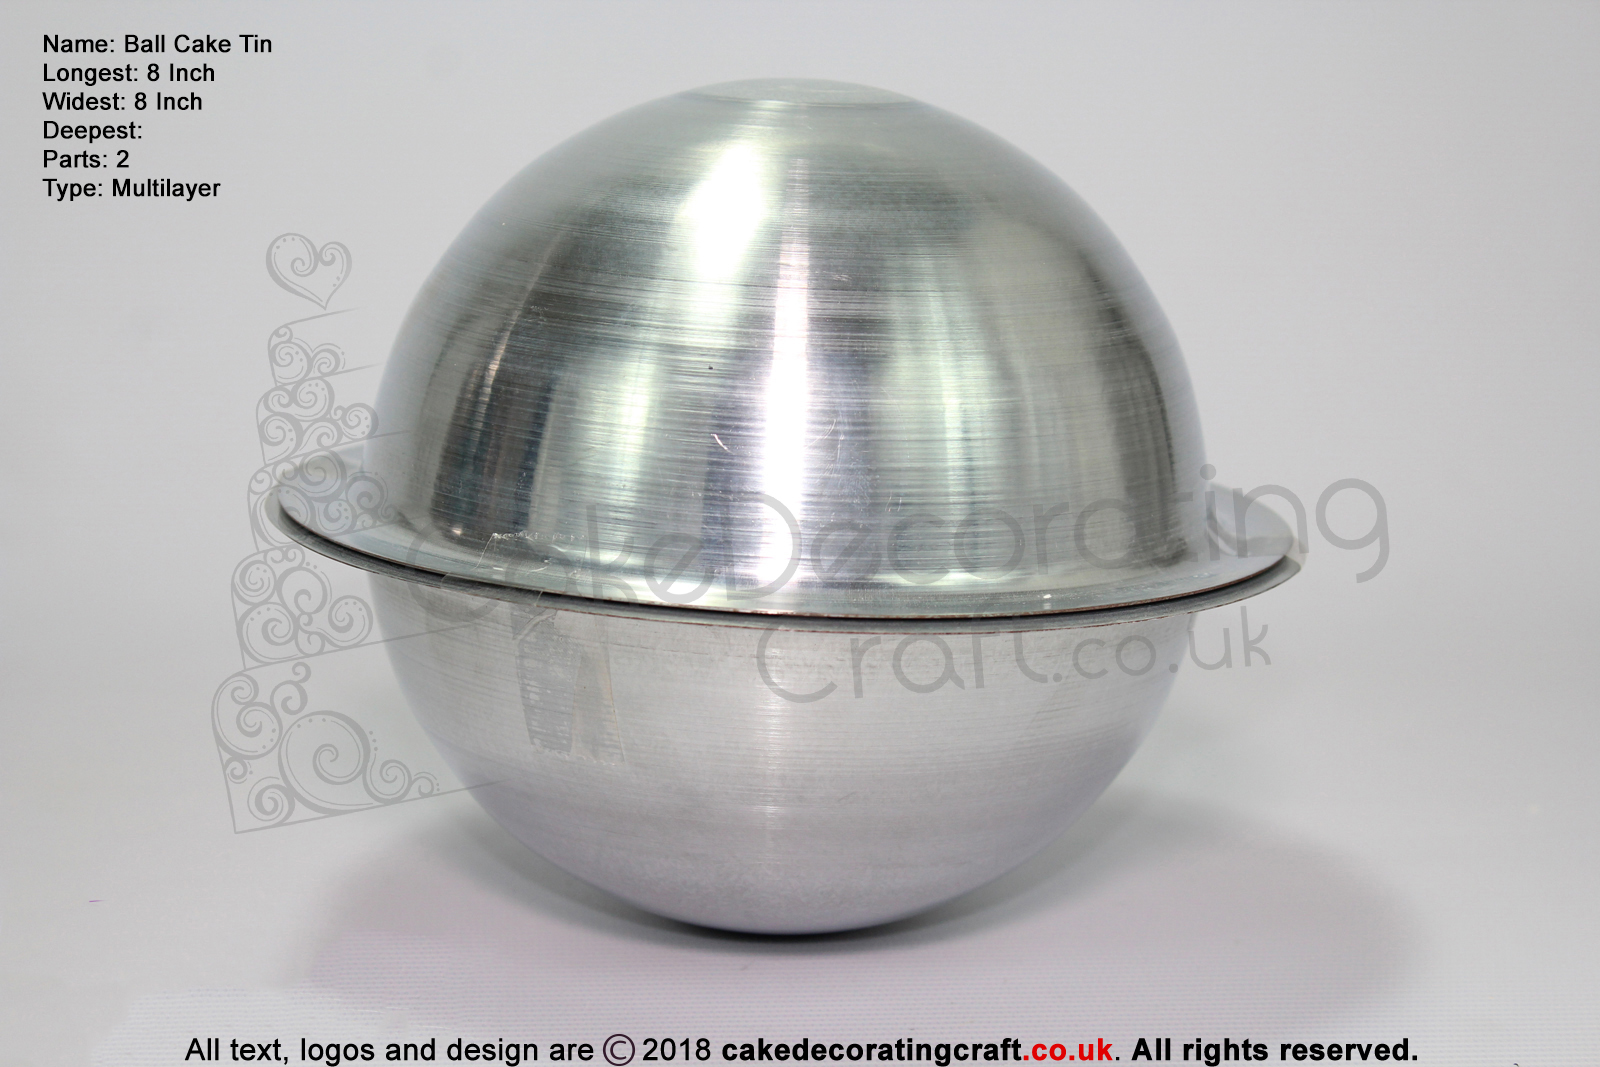 Ball | Bobbies | Sphere | Football | Pregnant Belly | Size 8 Inch | Novelty | Cake Baking Tin